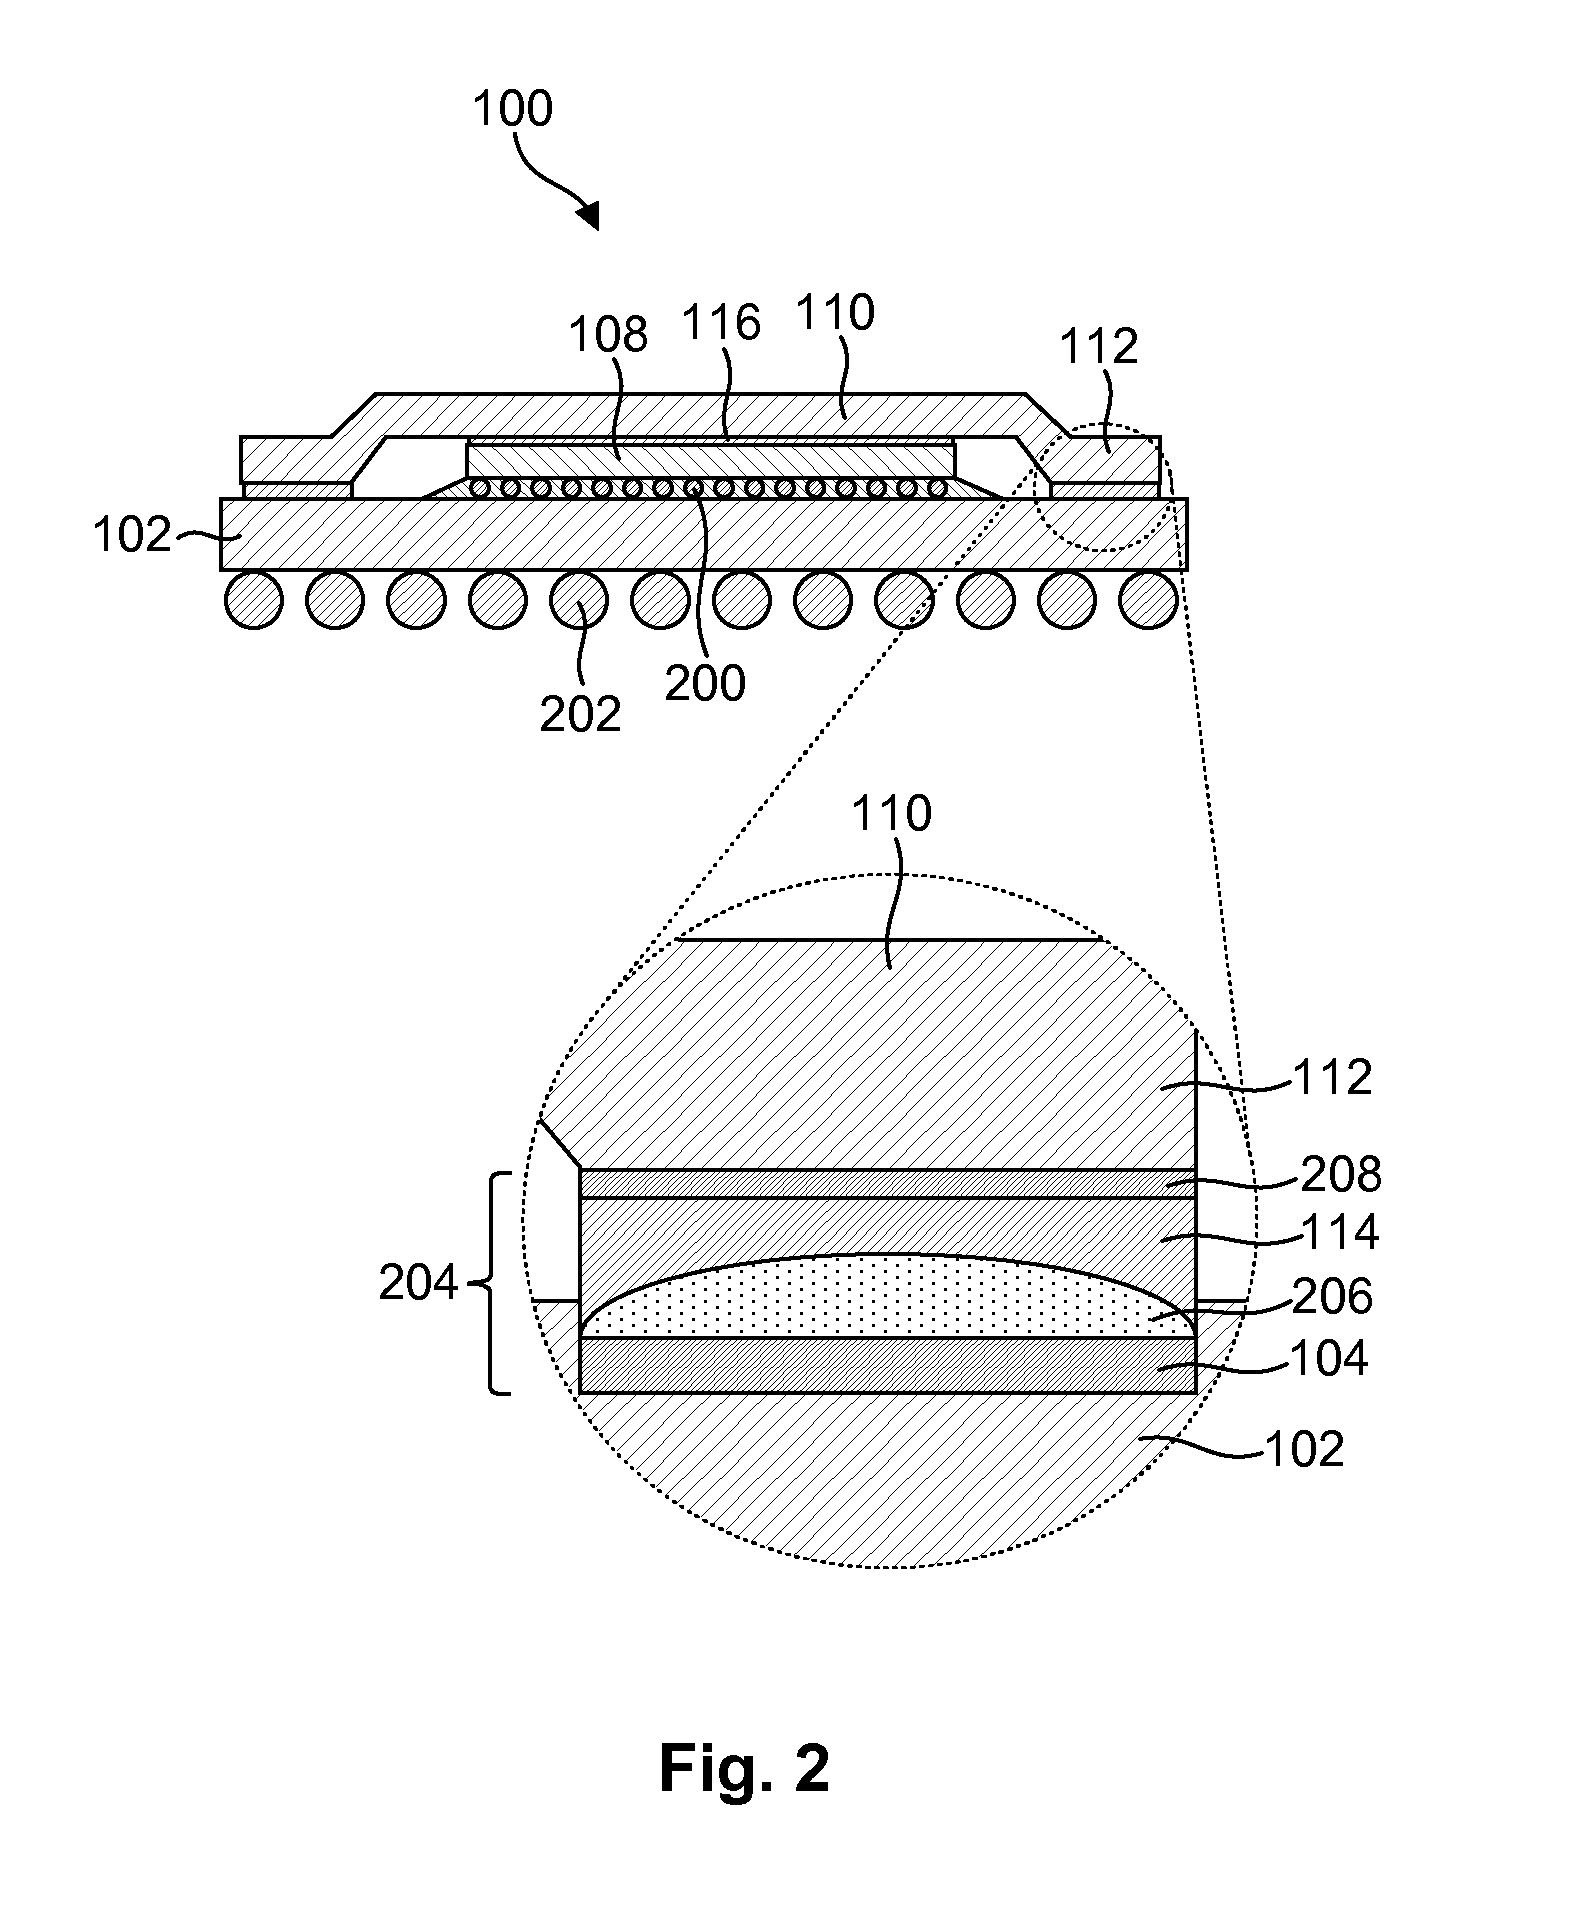 Grounded lid for micro-electronic assemblies